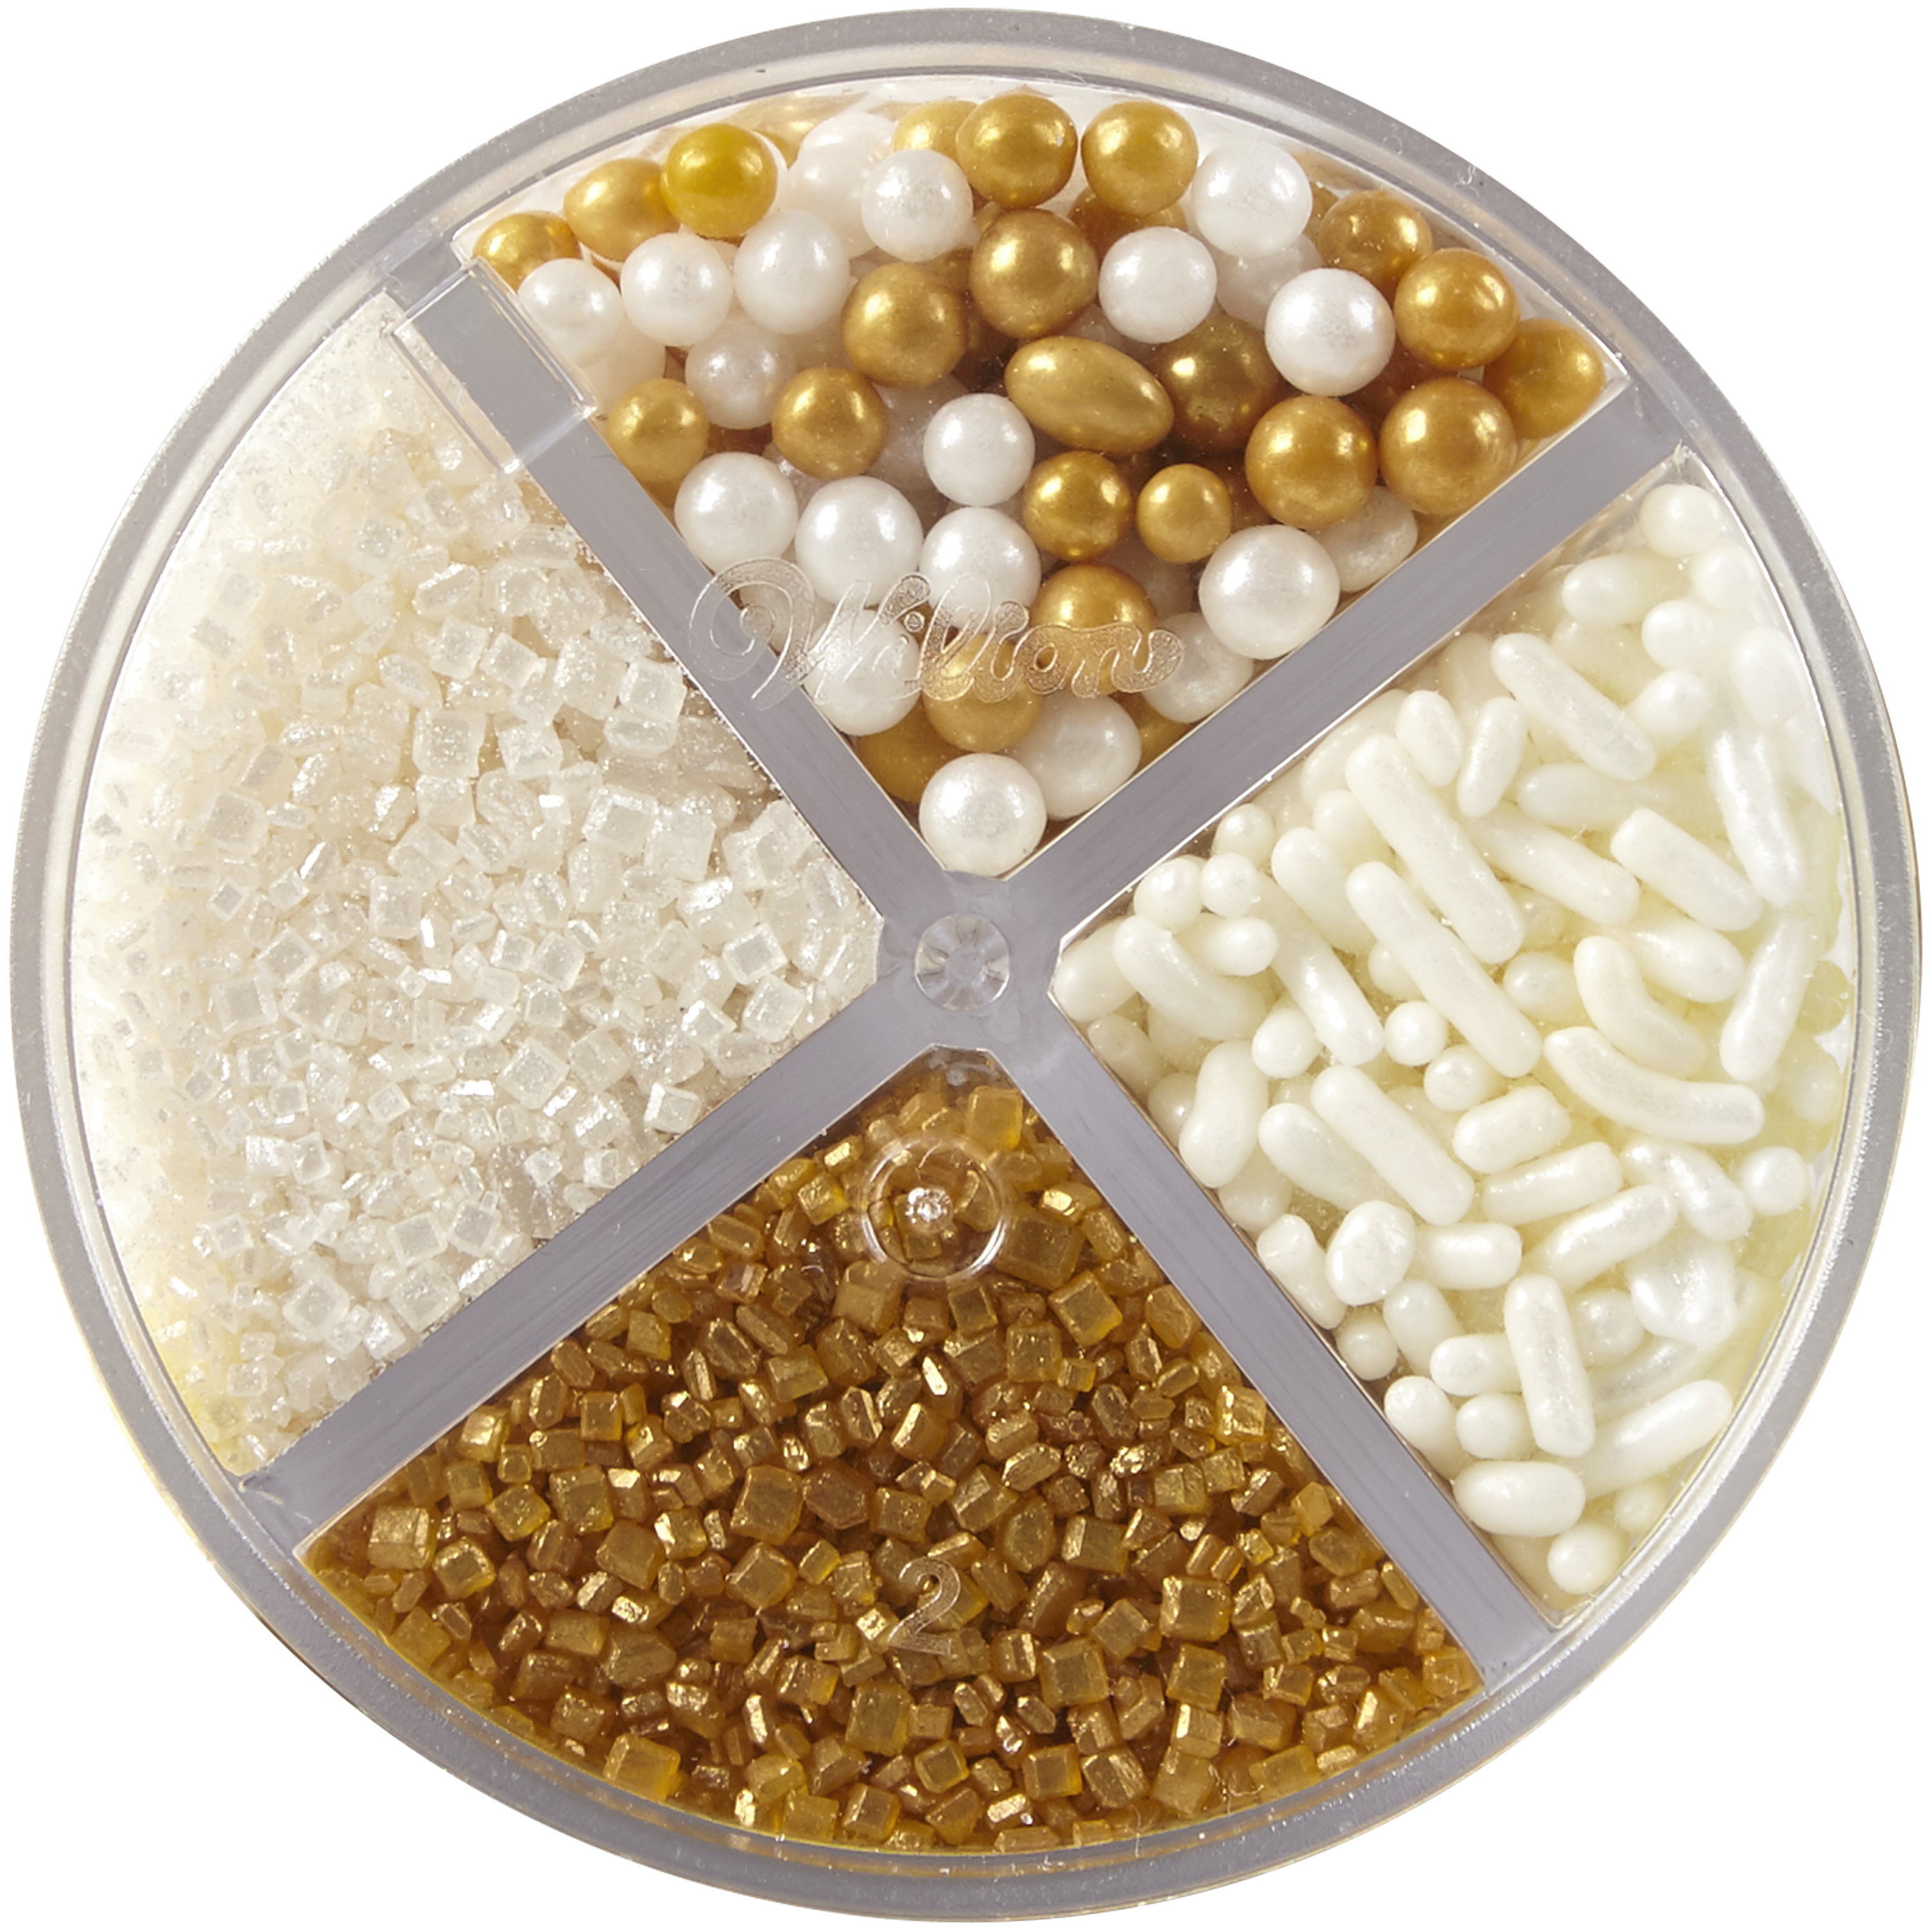 Wilton Pearlized Gold Sprinkle Assortment, 3.8 oz. - image 2 of 4